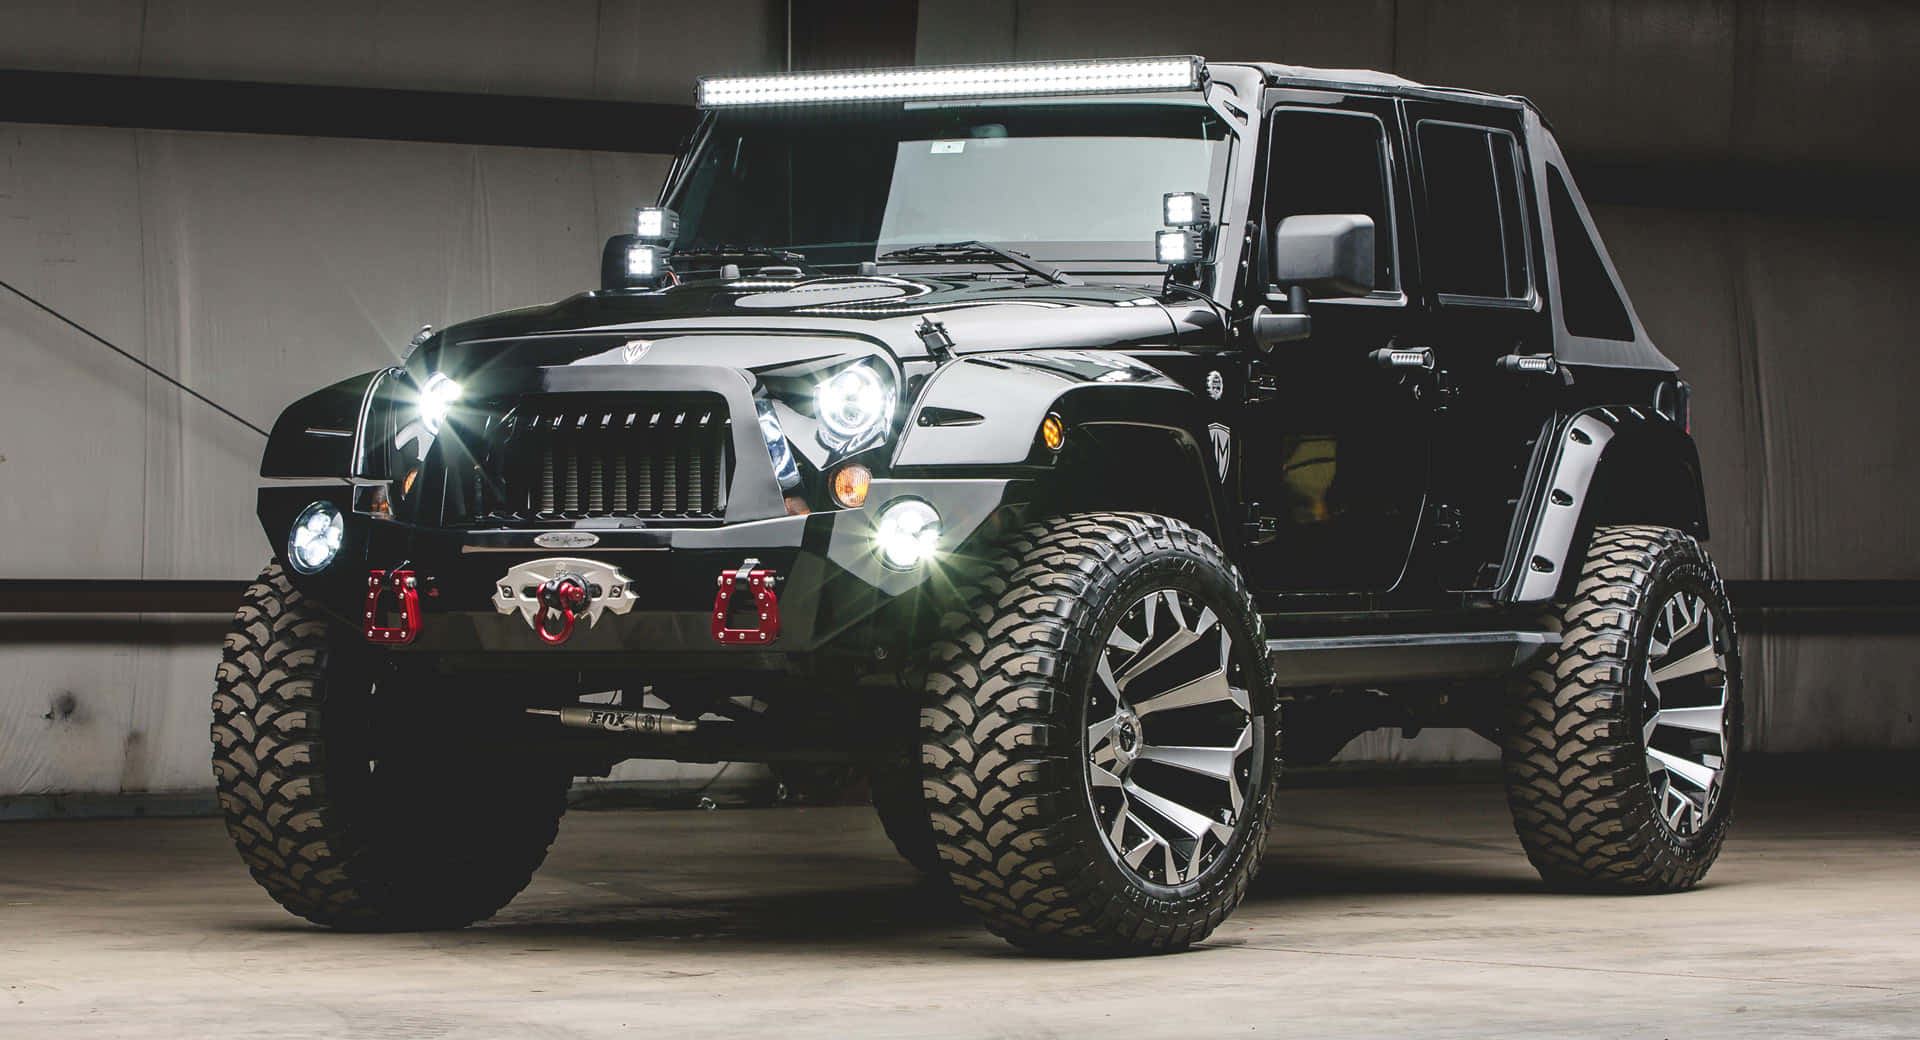 "Experience the Road in the Iconic Jeep Wrangler"